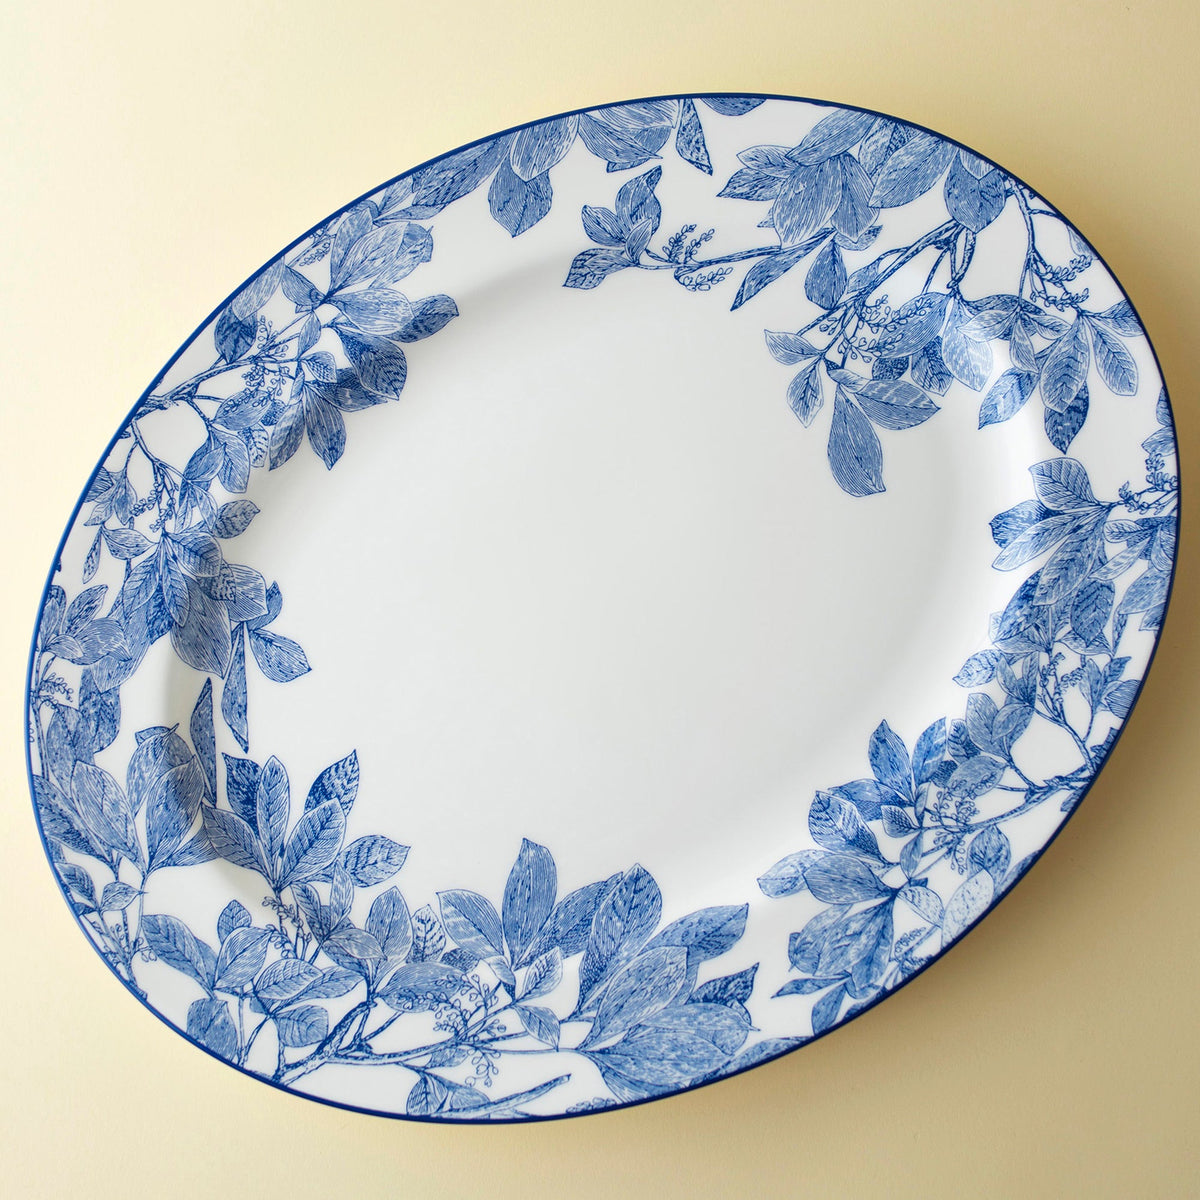 An oval ceramic plate with a blue floral pattern along the rim, set against a plain background, this Arbor Oval Rimmed Platter by Caskata Artisanal Home exudes high style and elegance.